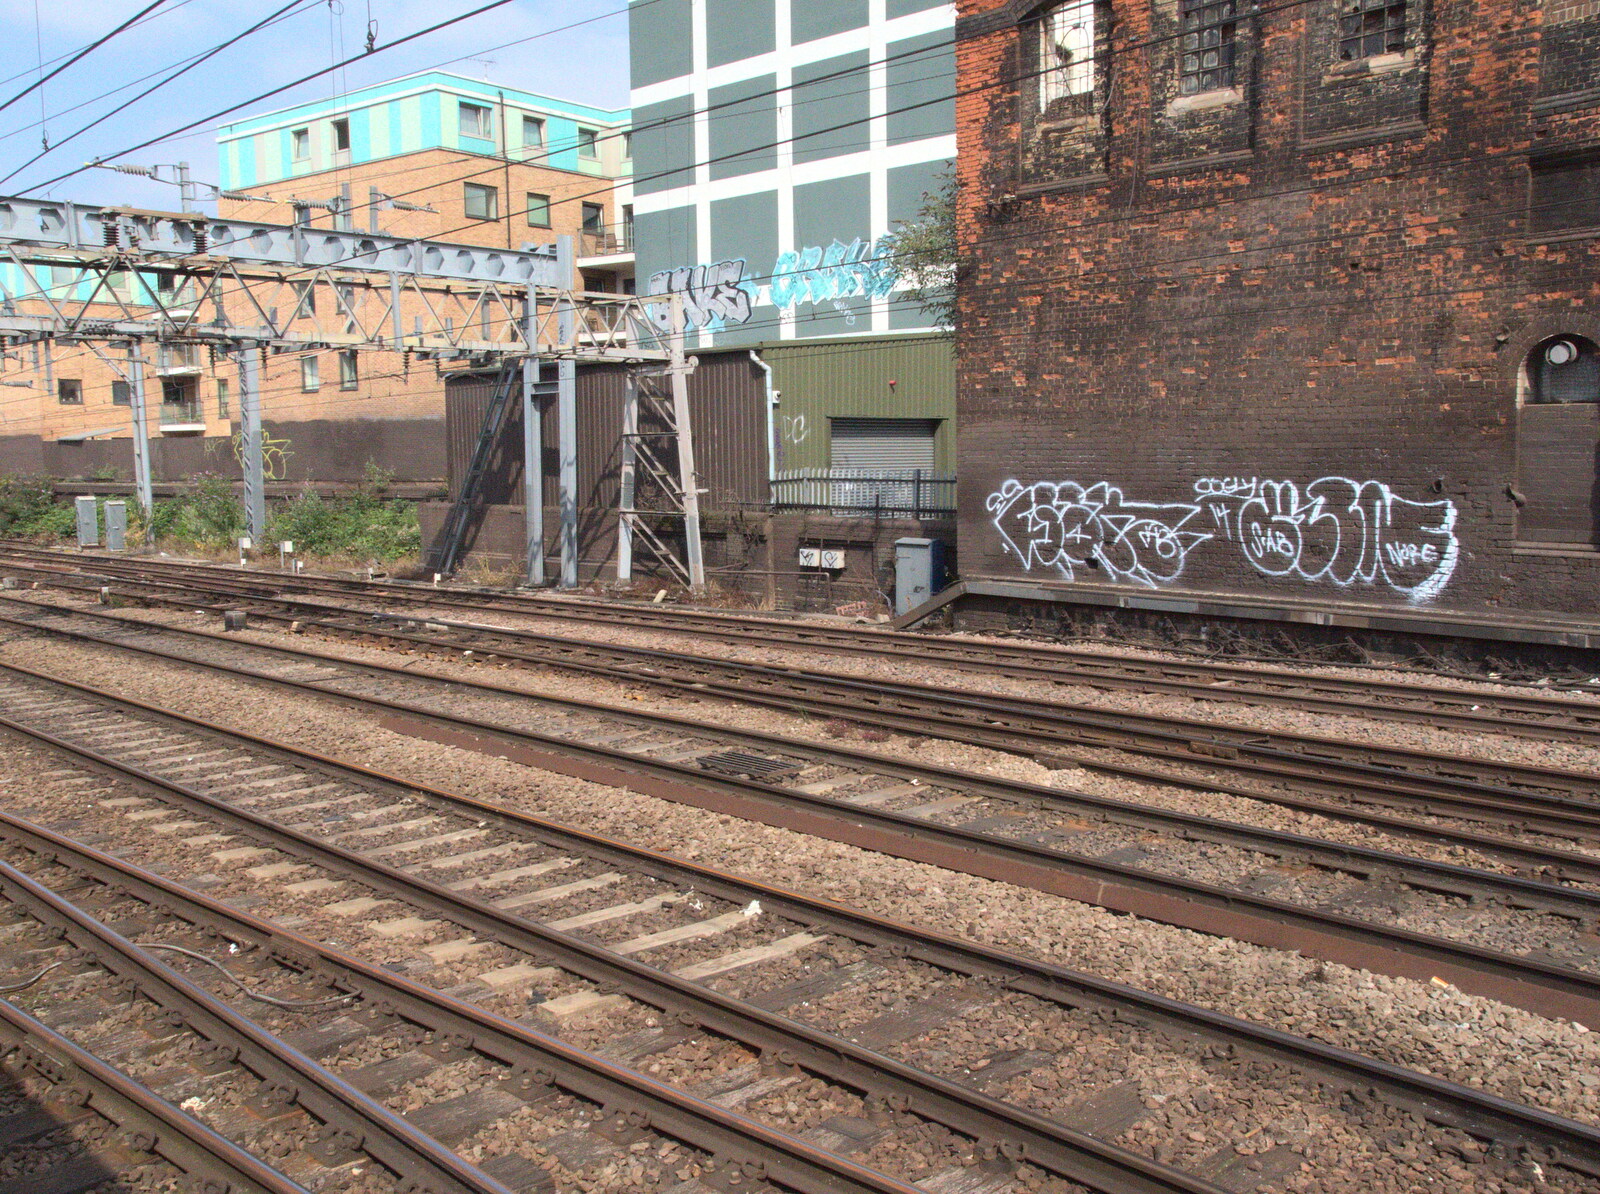 More rows of railway track from A Week on the Rails, Stratford and Liverpool Street, London - 23rd July